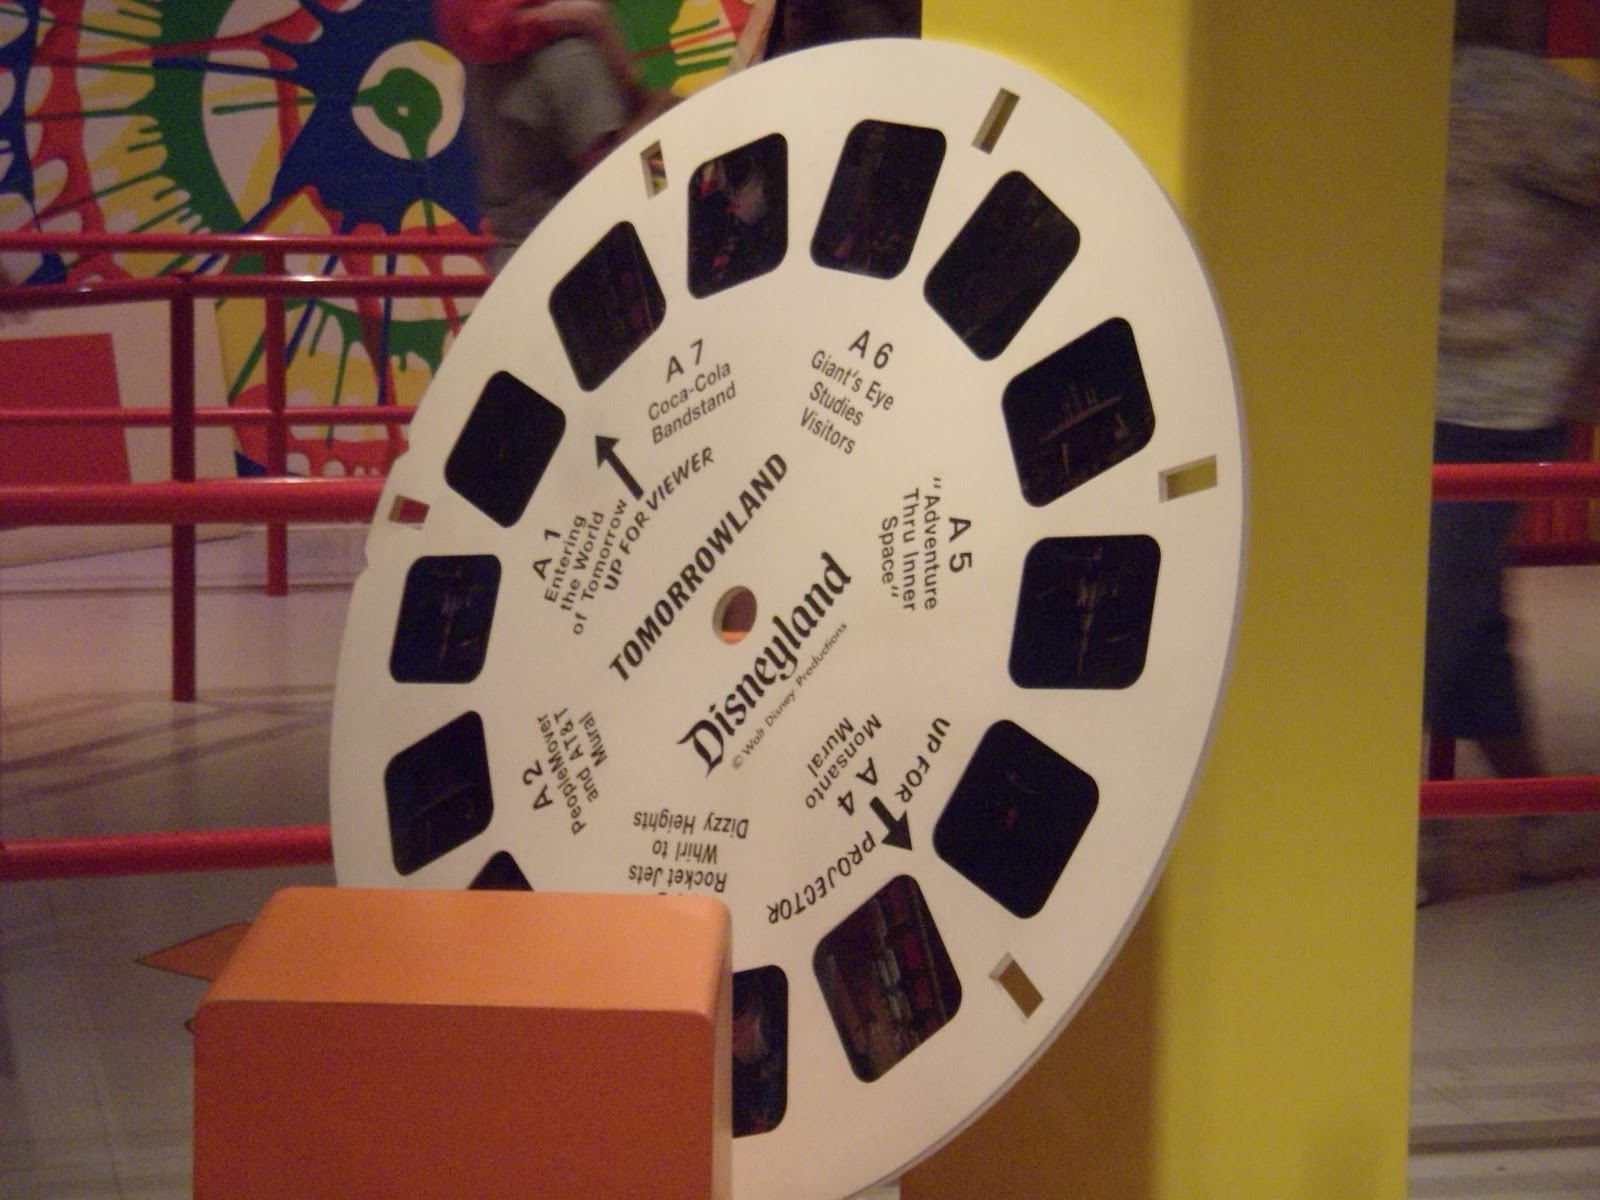 Williams Family: Do You Know the Secret About the Giant View-Master?